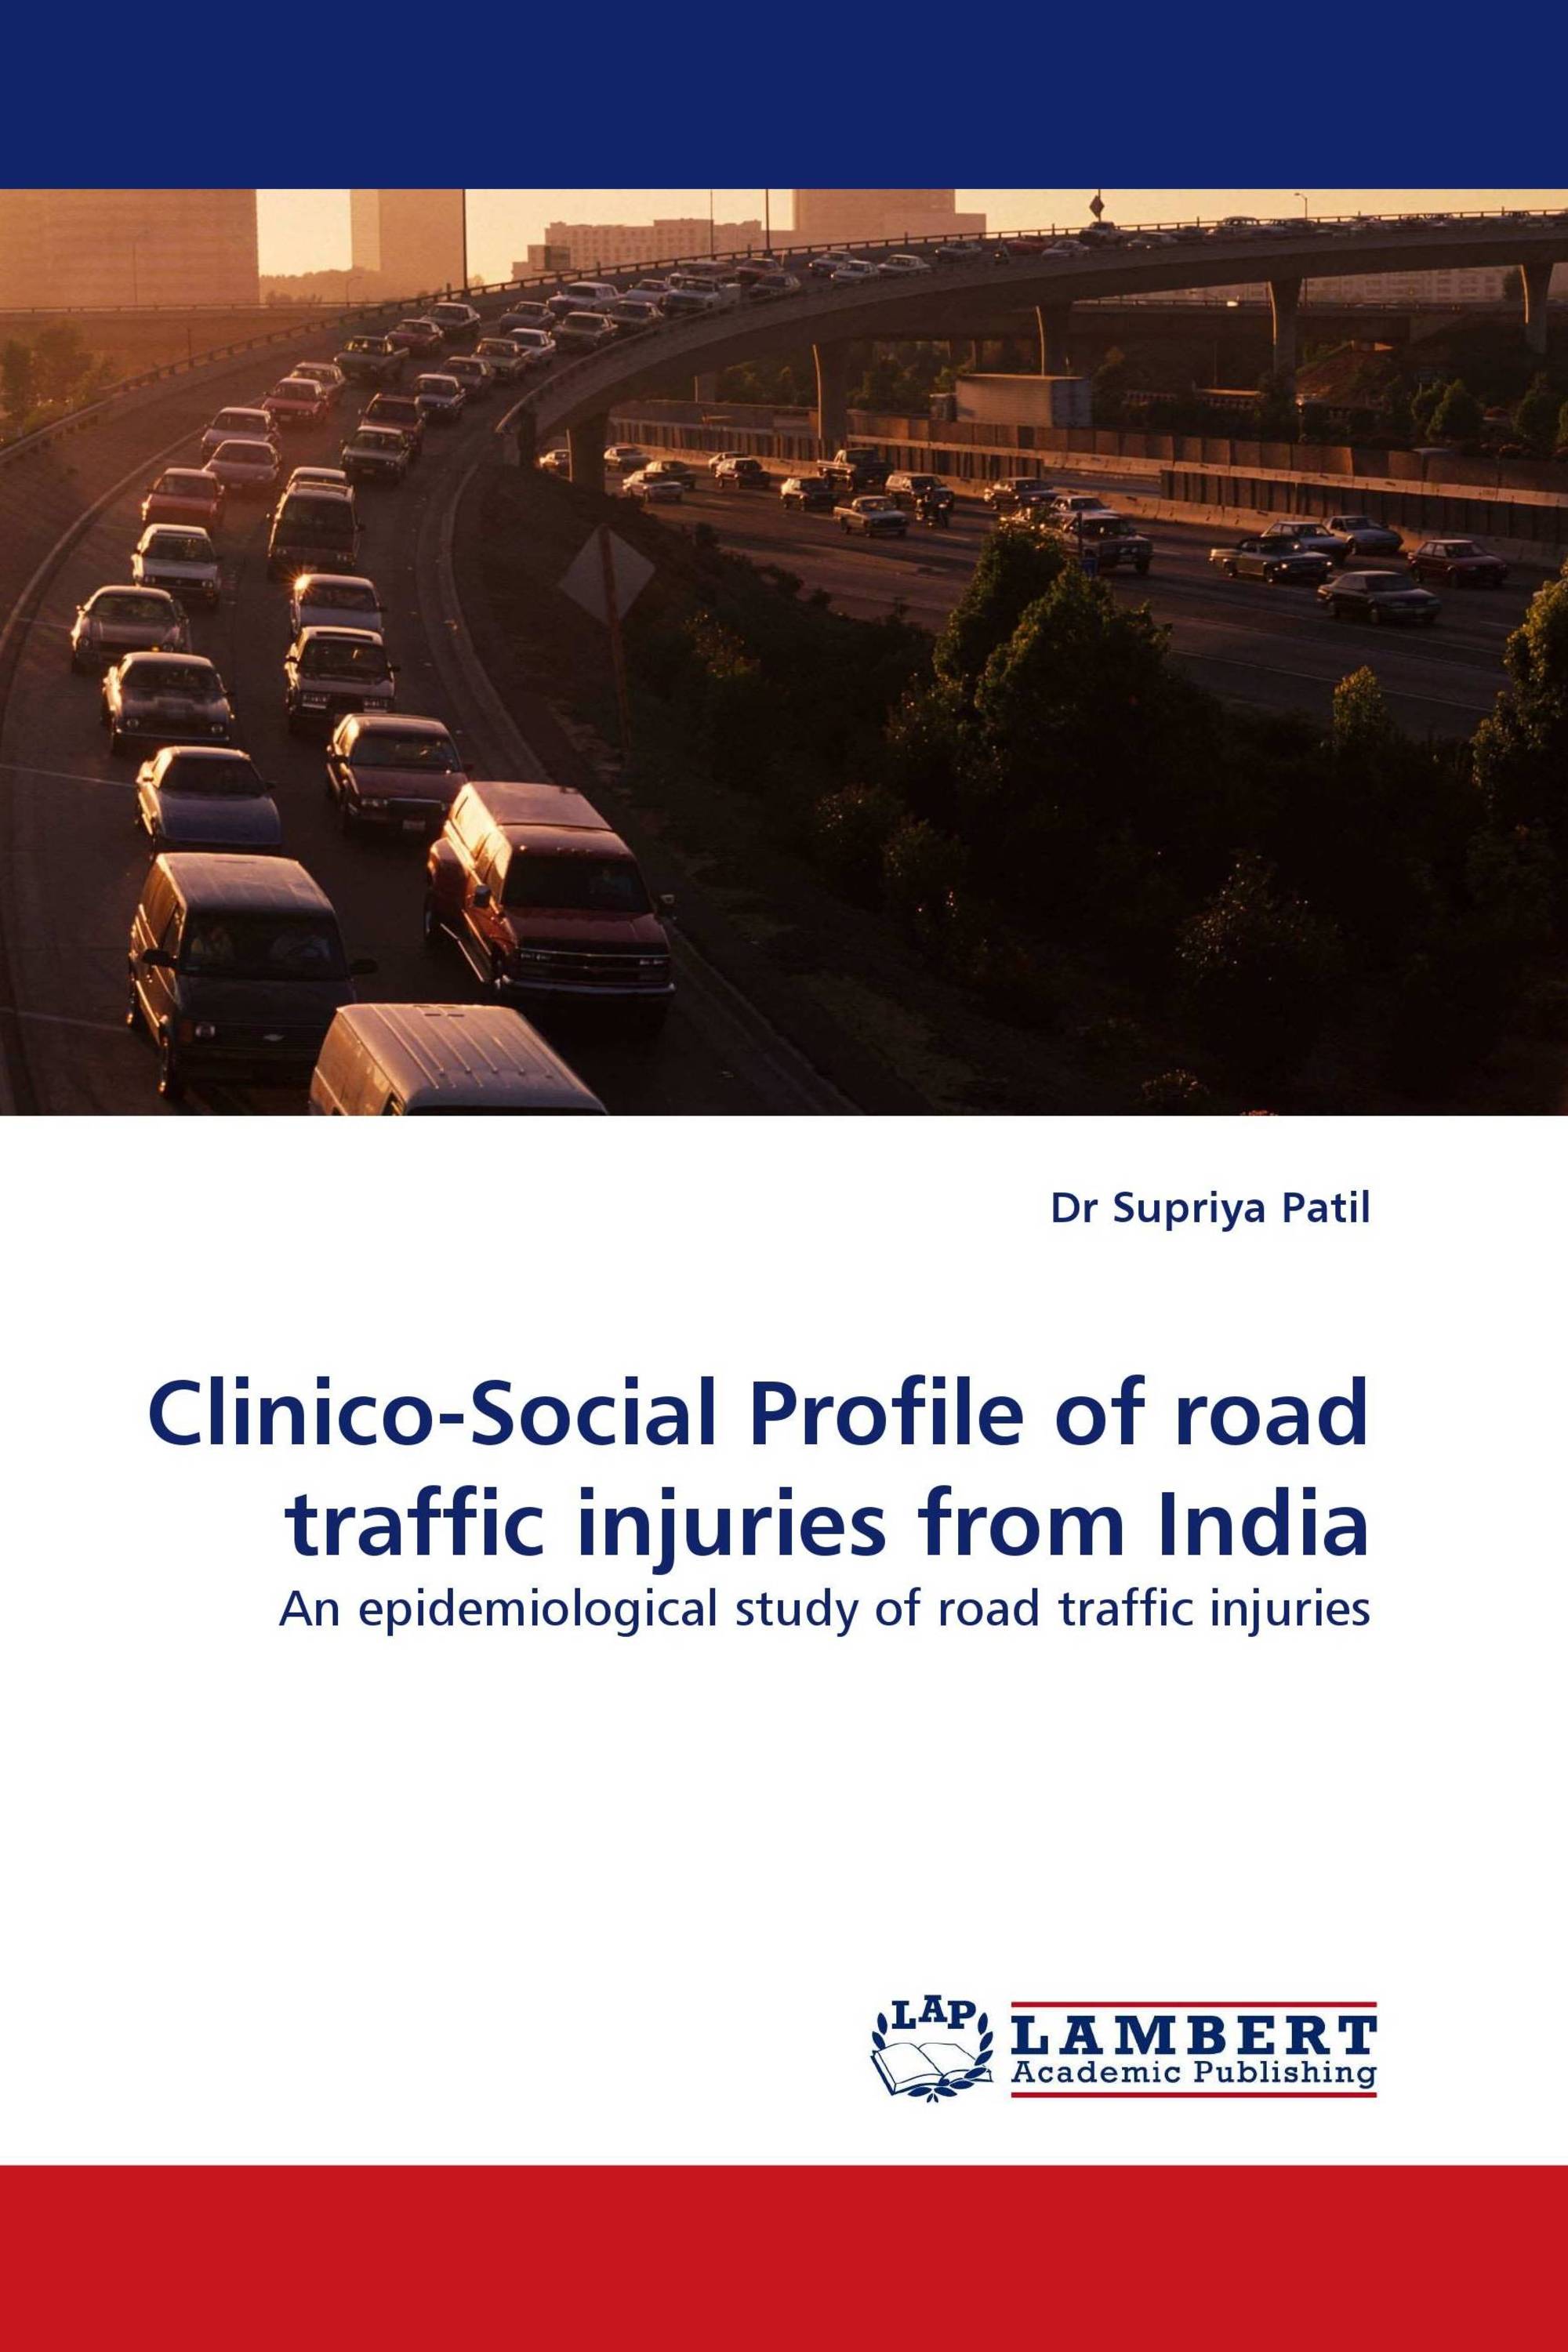 Clinico-Social Profile of road traffic injuries from India